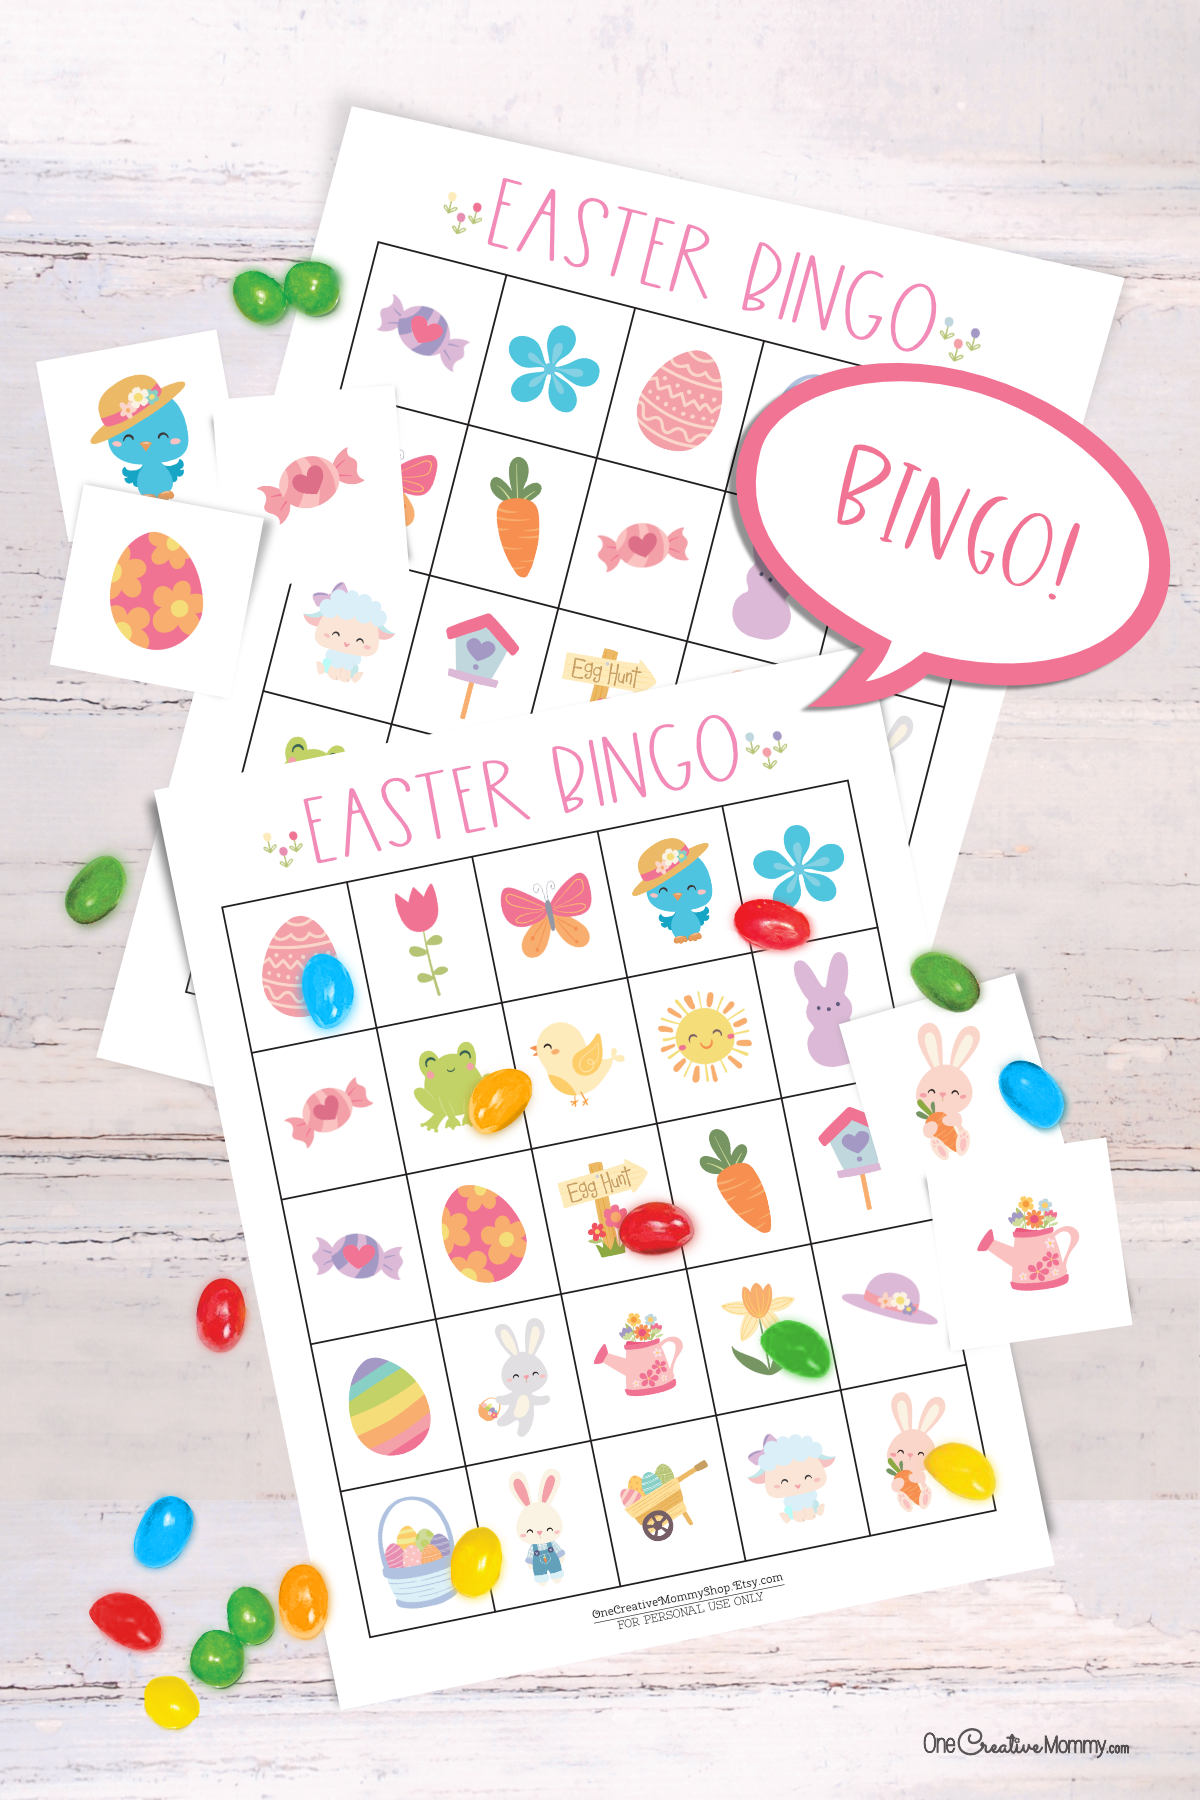 2 Easter bingo game cards are laid on top of each other on a white table. There is a small pile of jellybeans. Six calling cards are scattered across the game, and several spots are marked with jellybeans. A word bubble says Bingo!